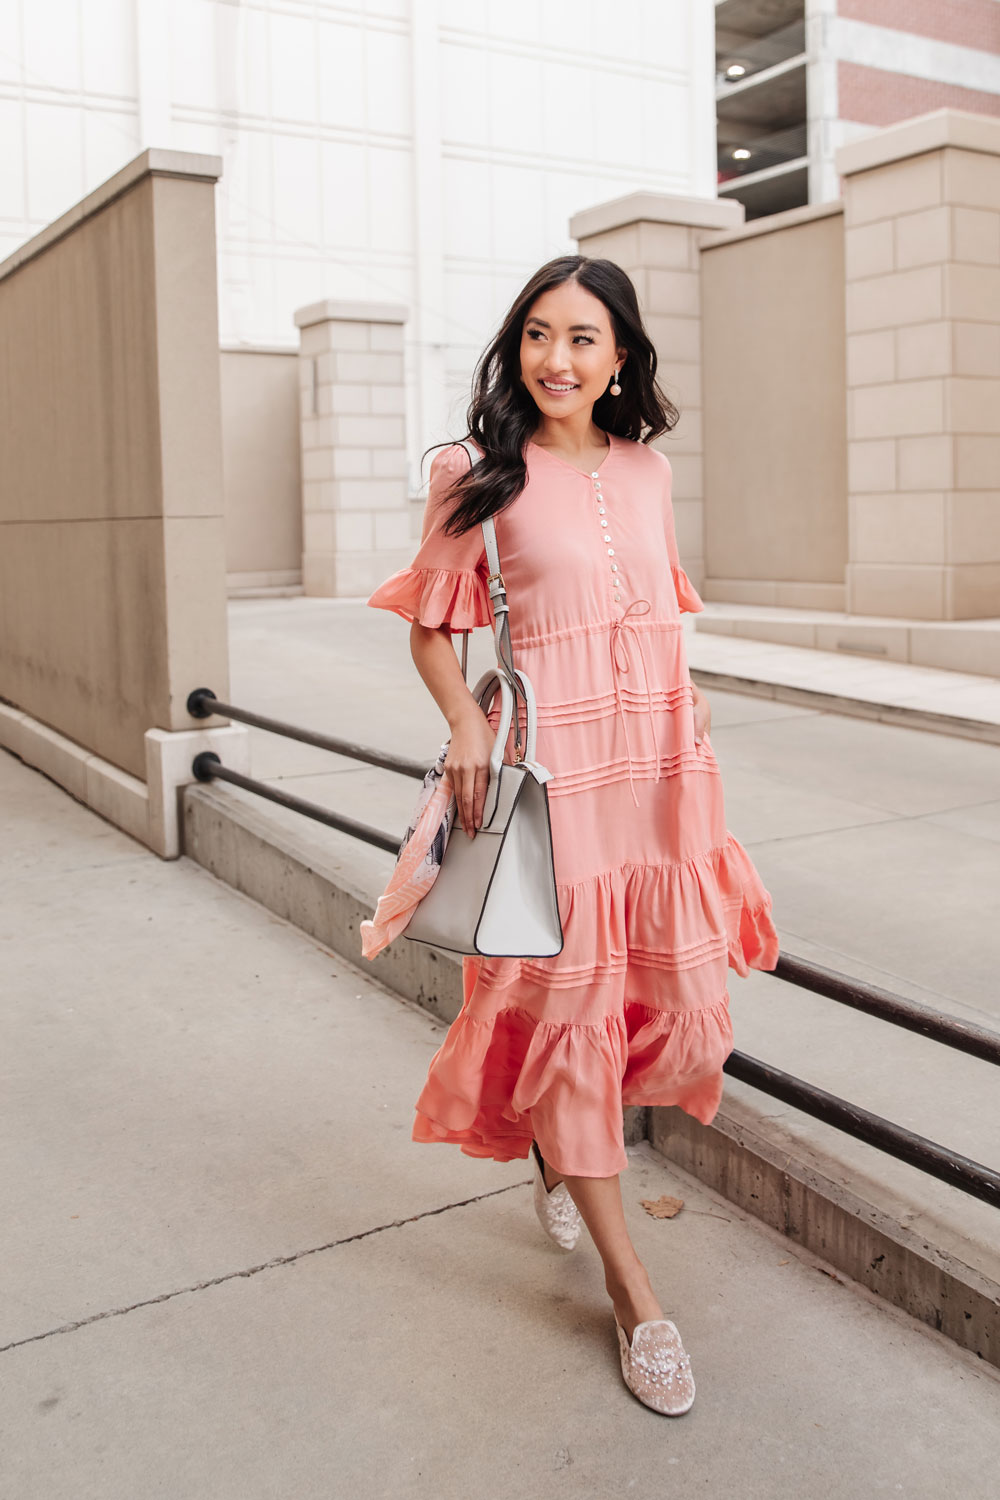 Women in pink tiered dress with gray purse